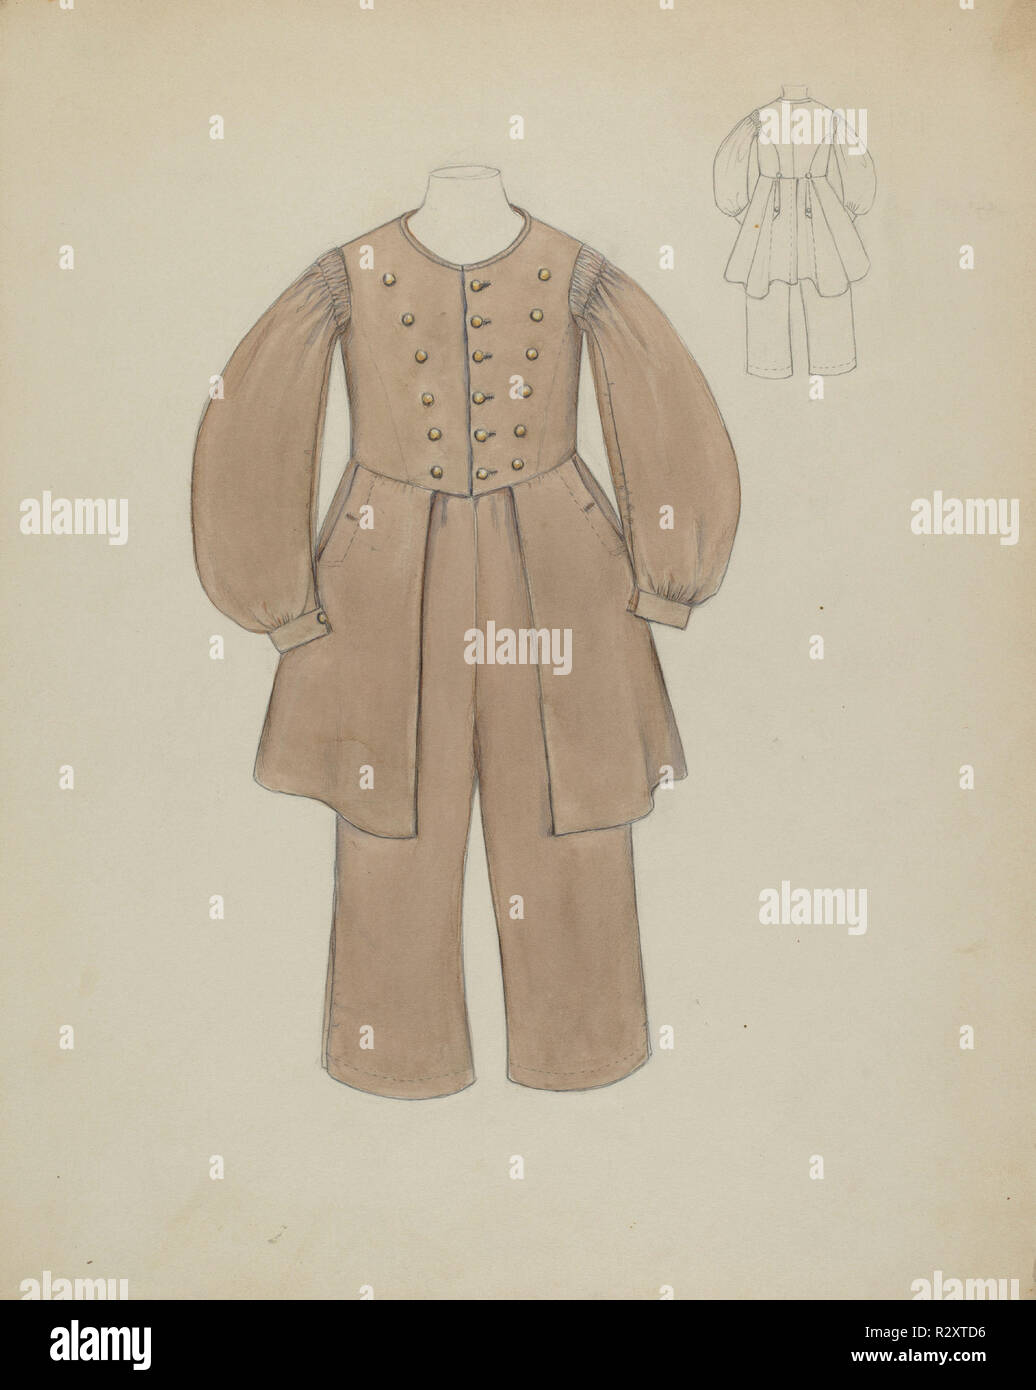 Boy's Suit. Dated: c. 1937. Dimensions: overall: 28.9 x 22.8 cm (11 3/8 x 9 in.). Medium: watercolor and graphite on paperboard. Museum: National Gallery of Art, Washington DC. Author: Jessie M. Benge. Stock Photo